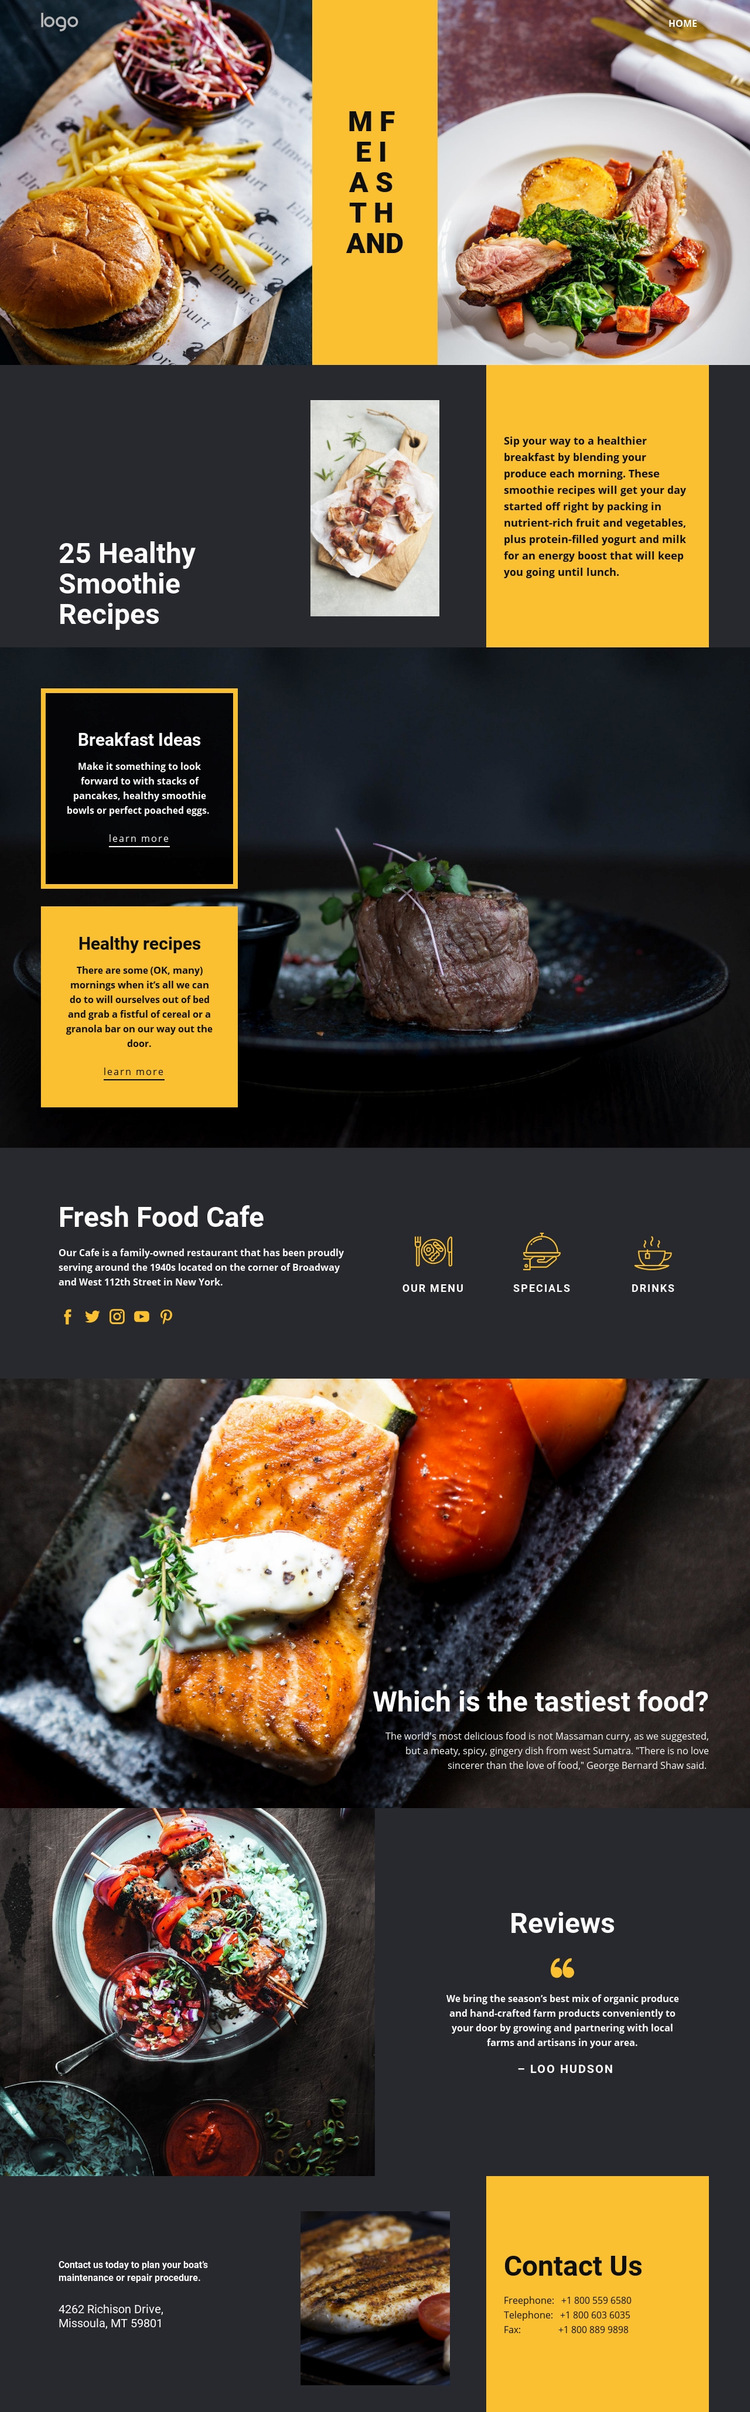 Good recipes for good food Web Page Design